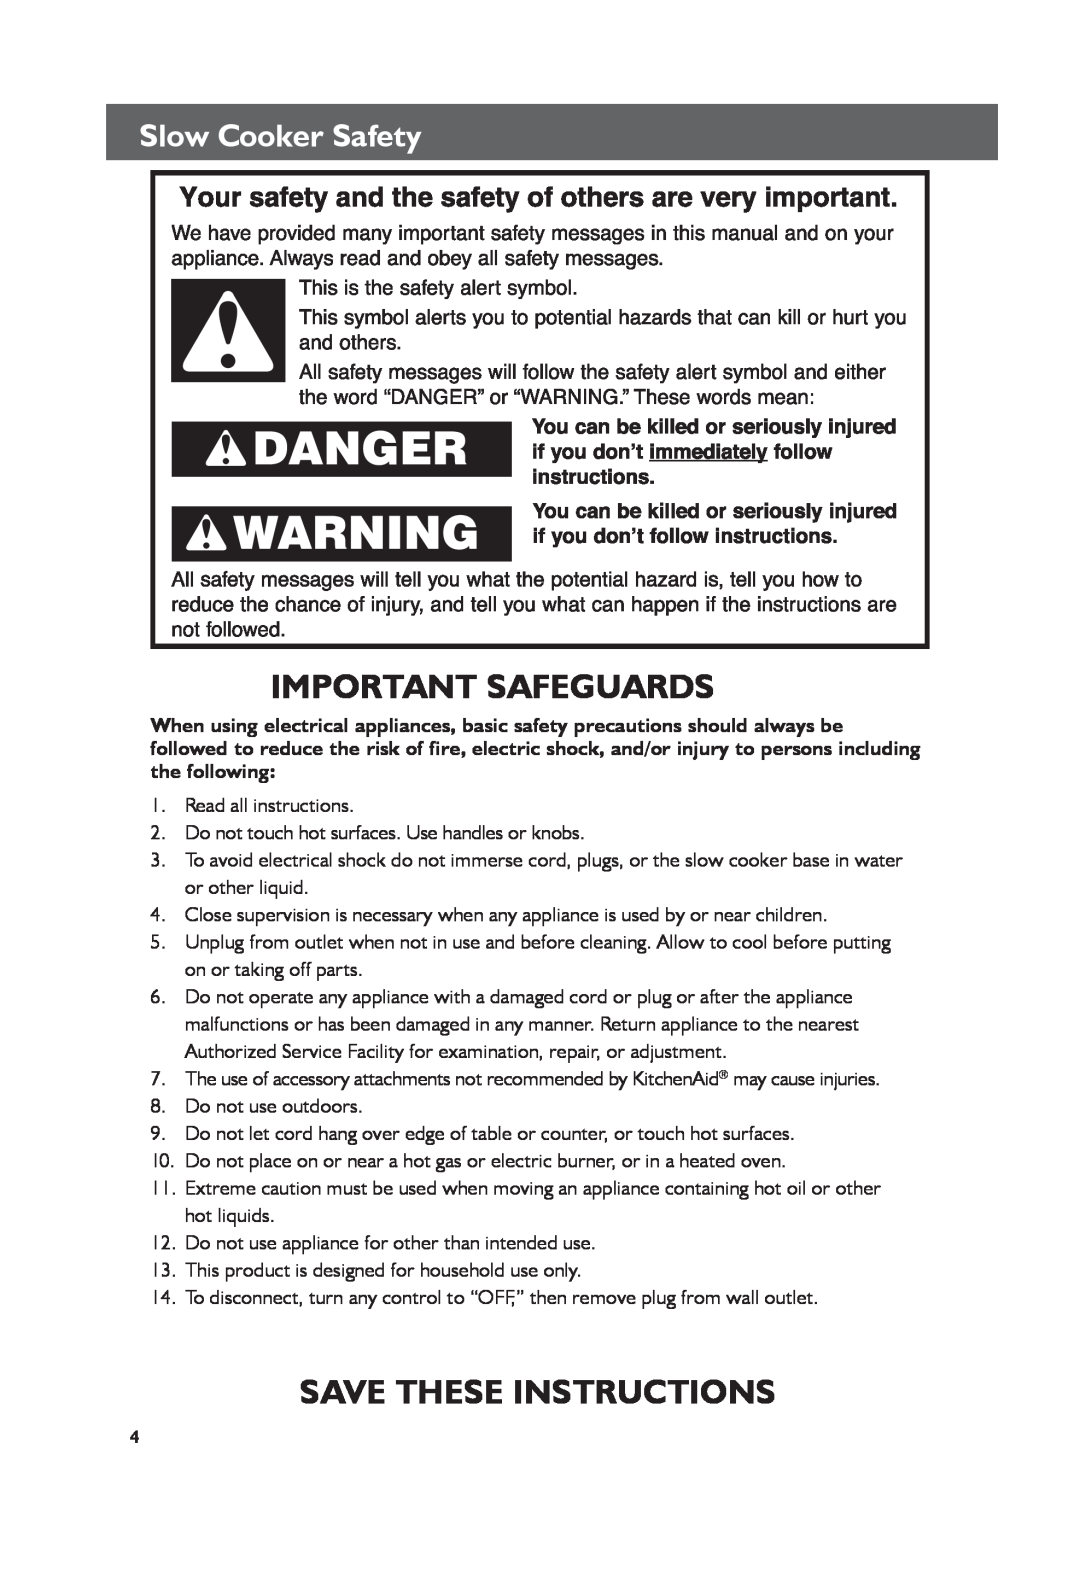 KitchenAid KSC6222, KSC6223 manual Important Safeguards, Save These Instructions, Slow Cooker Safety 